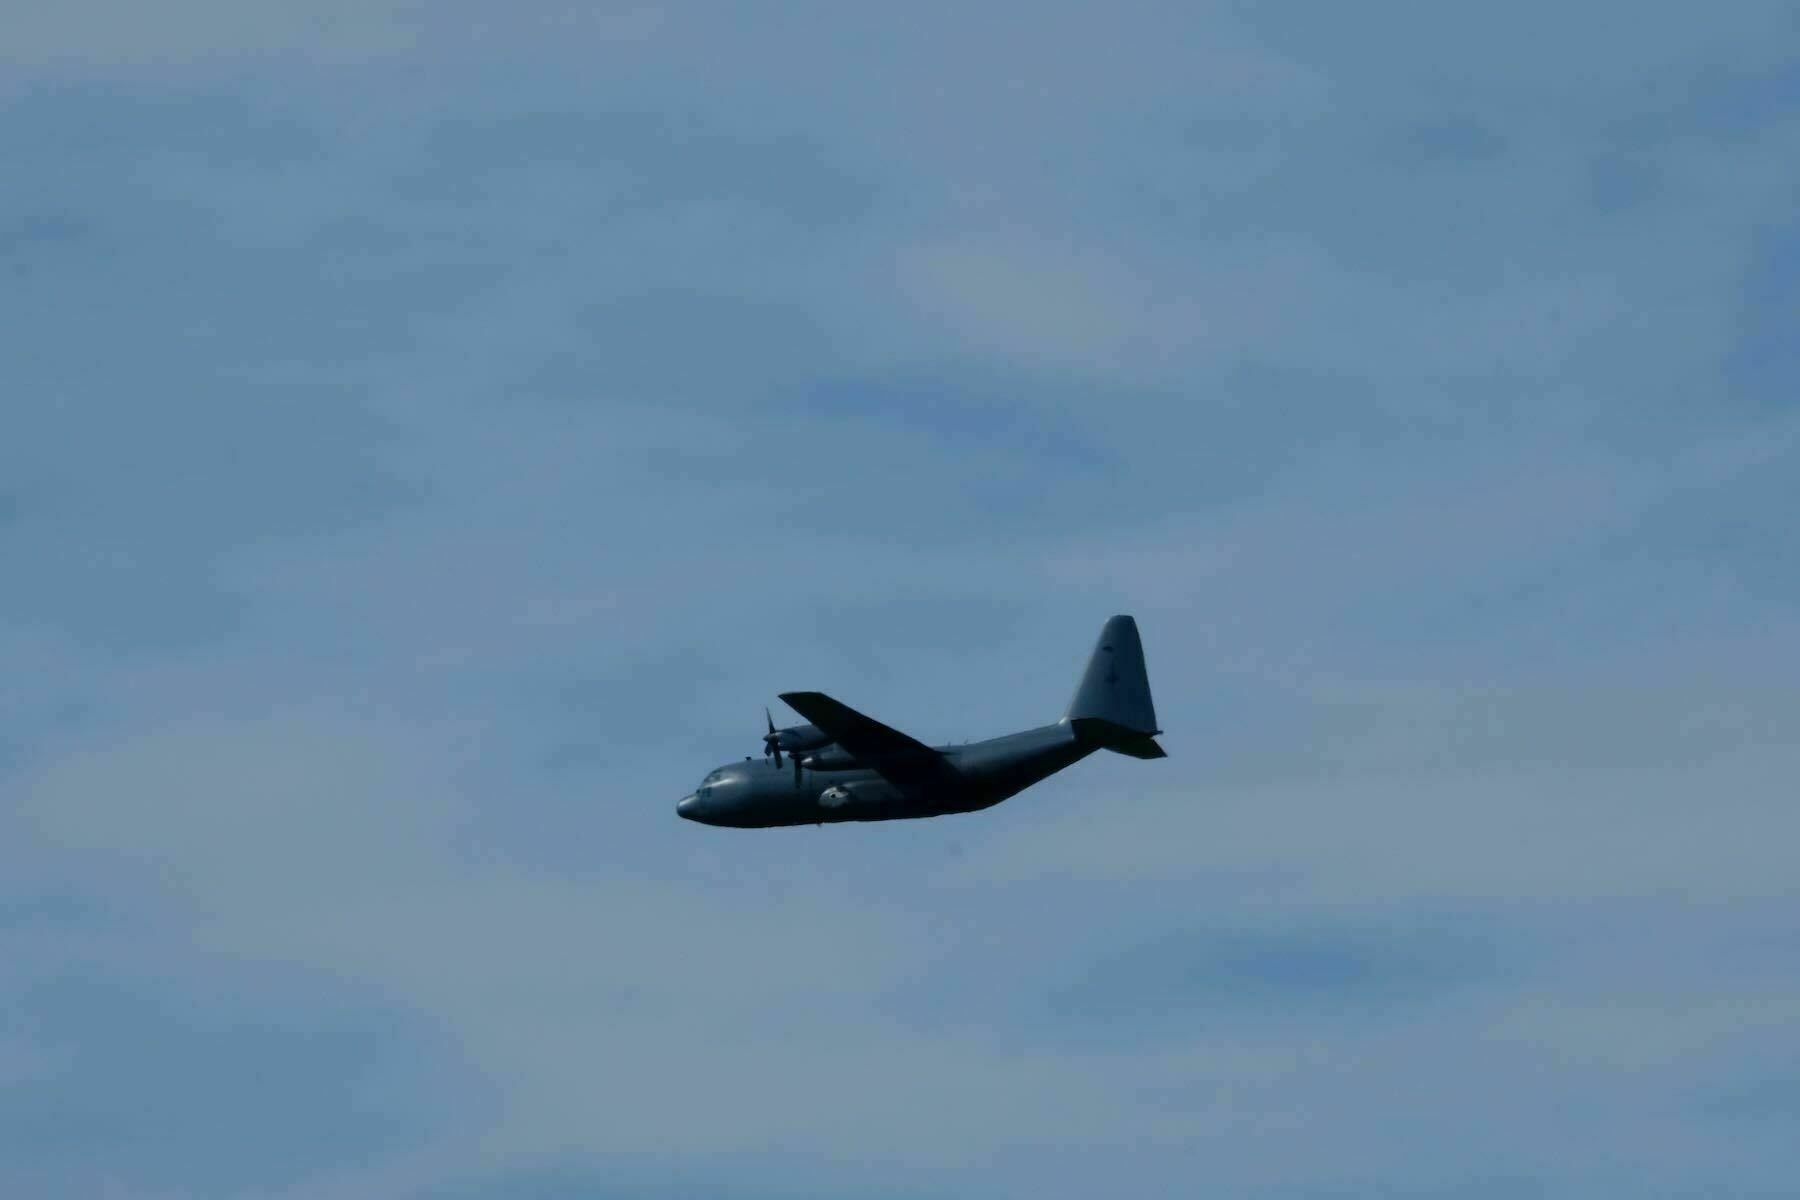 ANother C 130H NZ Hercules aircraft flying by.  